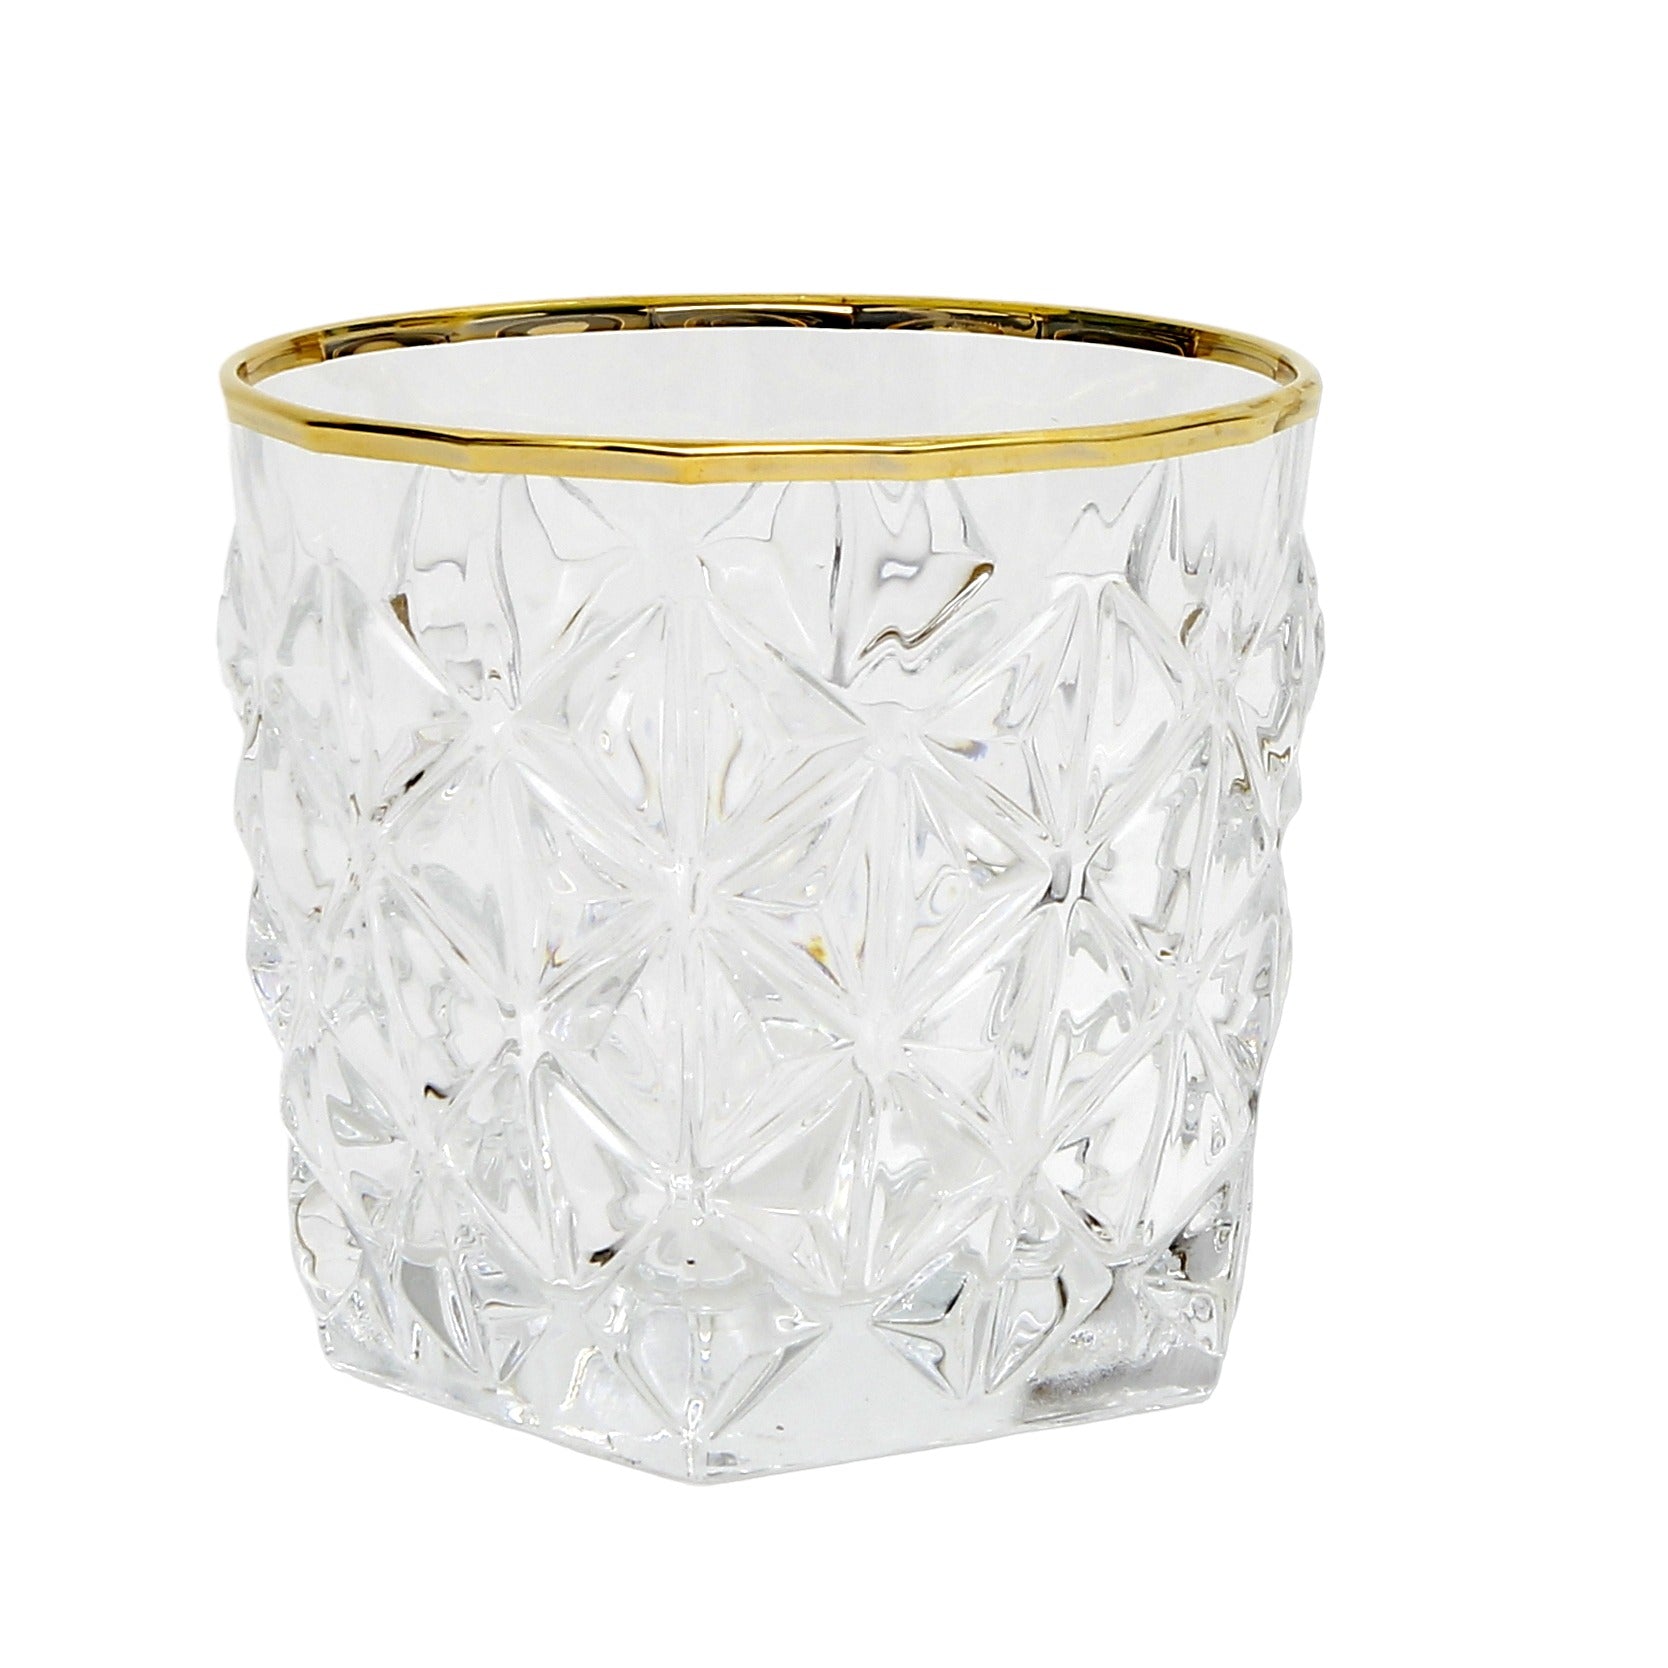 CRYSTAL GLASS: Exquisite Italian Crystal Round Glass for Whiskey/Old Fashion featuring a 24 Carat Gold Rim and Gold/Platinum Accents.